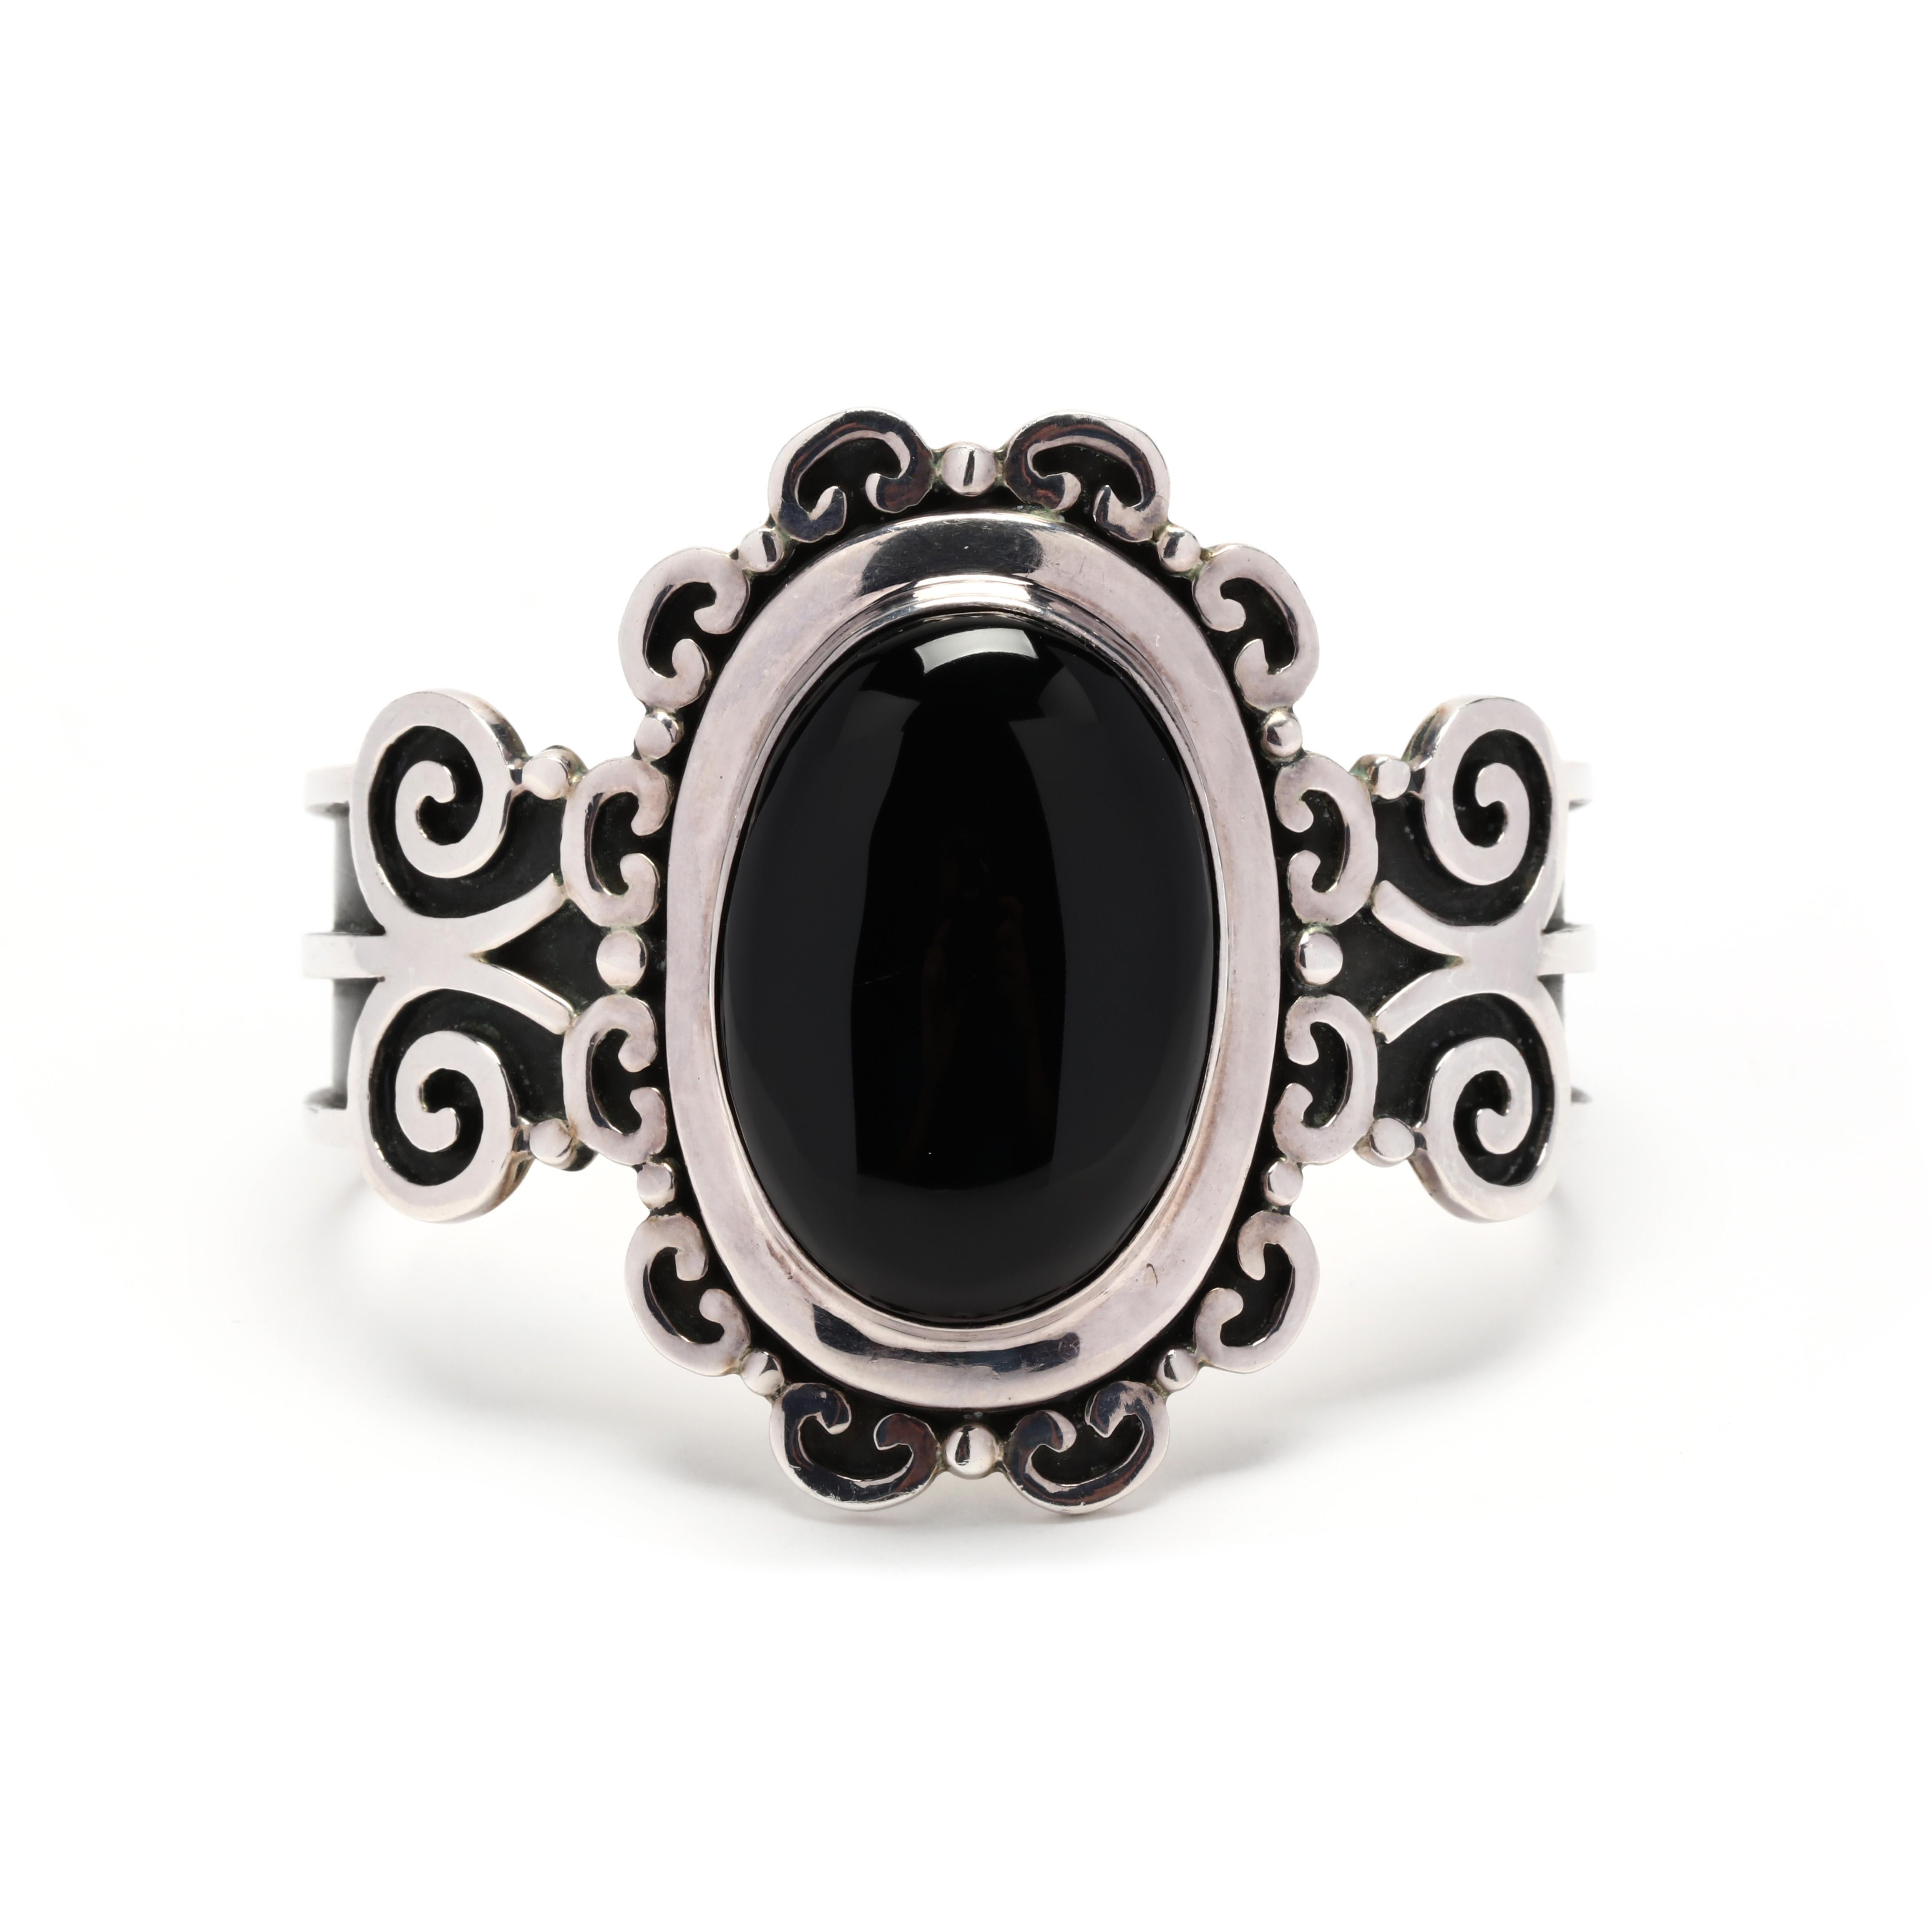 A vintage sterling silver gothic style black onyx cuff bracelet.  This adjustable bracelet features a center oval cabochon black onyx, surrounded by scrollwork frame, with oxidized accents.  It is stamped 925 Mexico. 

Stones:
-Black Onyx, 1
-oval